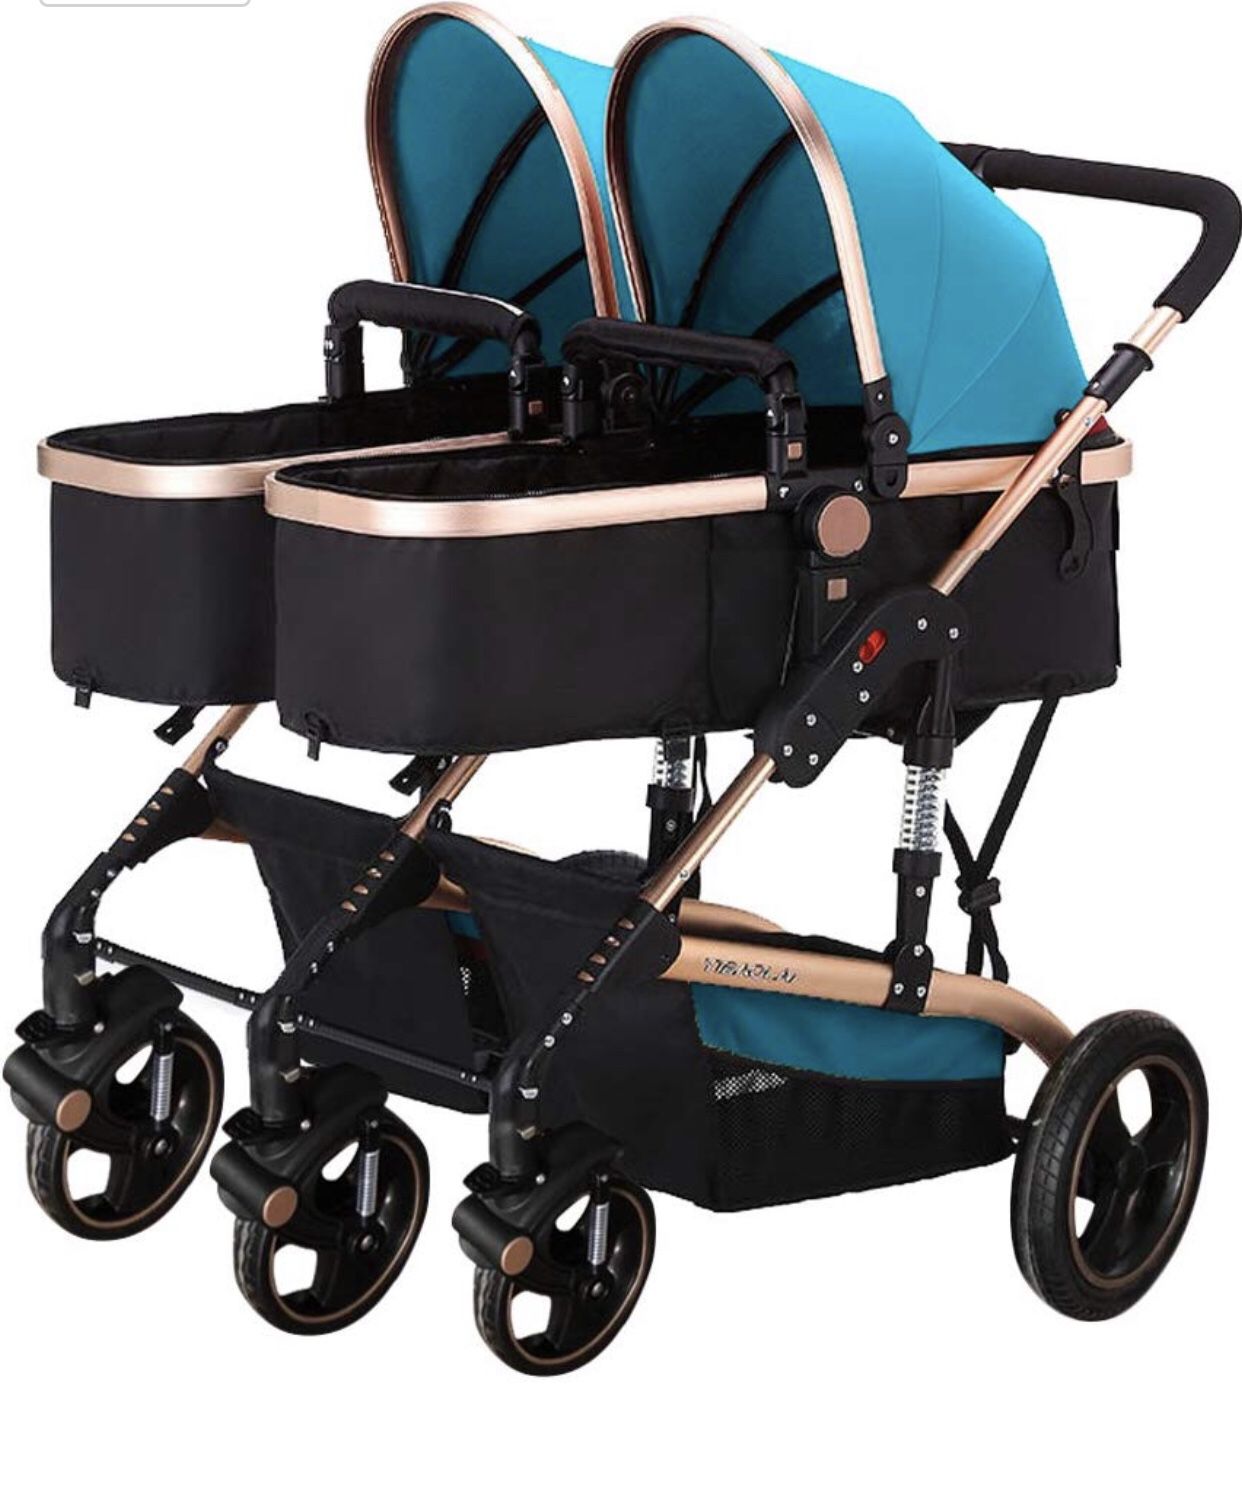 Ultralight Double Stroller Baby Twins Stroller Bassinet with Awning (Blue)